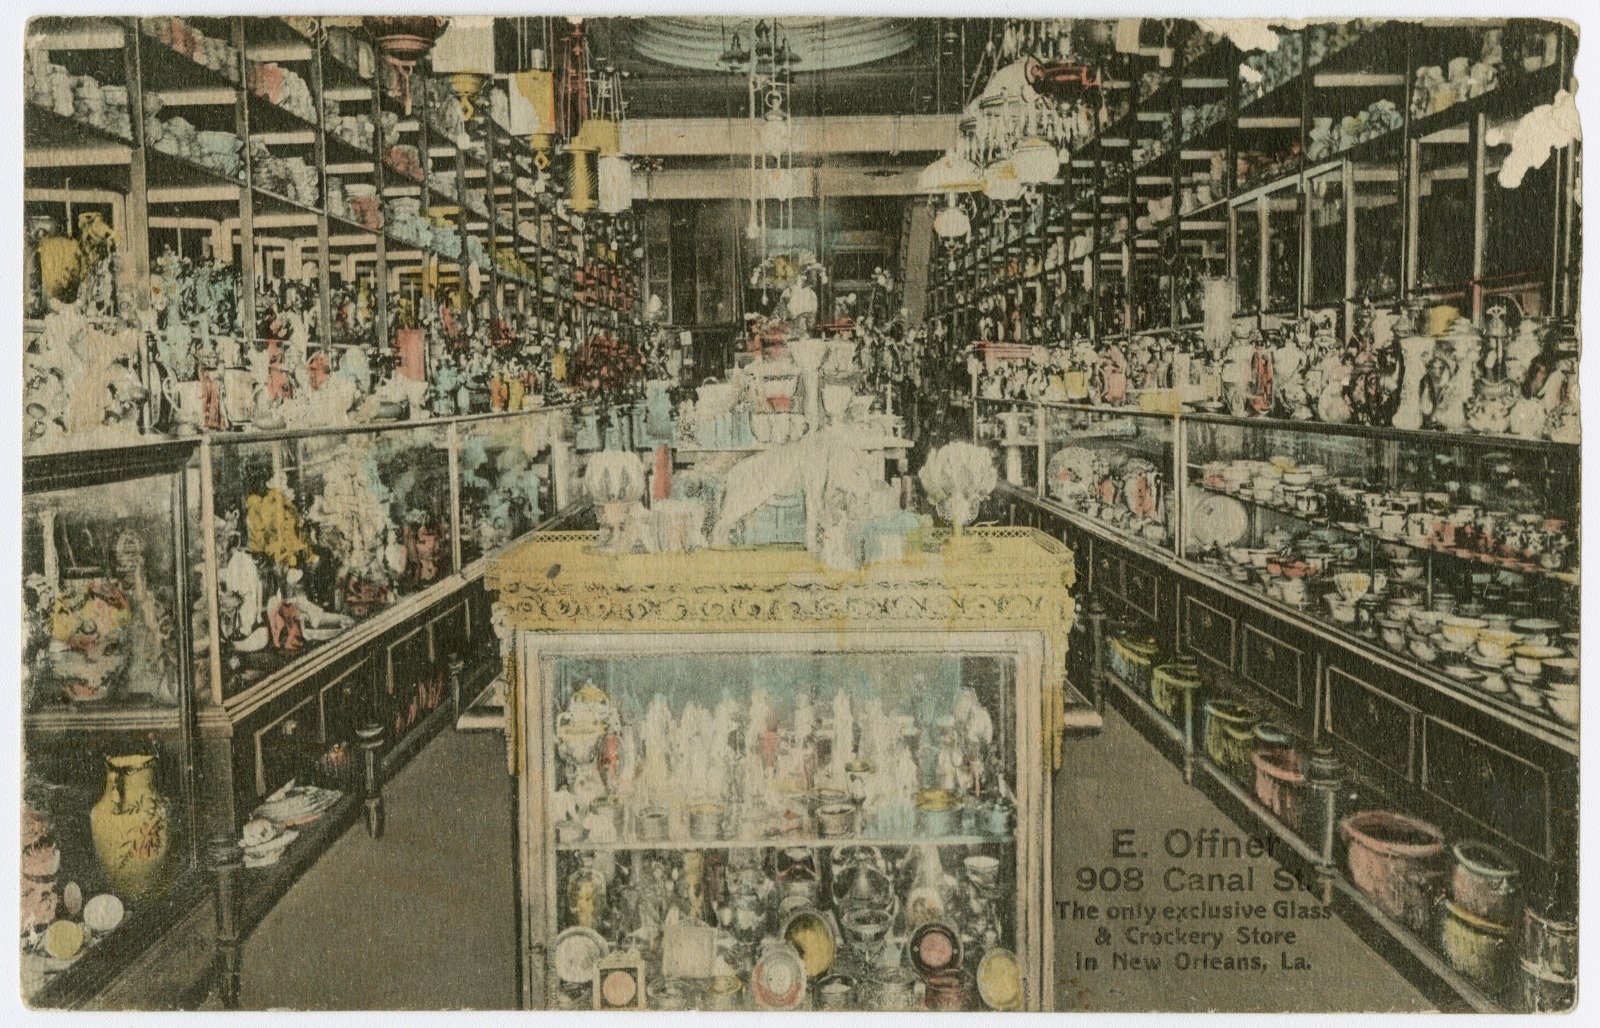   E. Offner, 908 Canal Street  ca. 1910; postcard  The Historic New Orleans Collection, Gift of Mr. Charles L. Mackie, 1981.317  